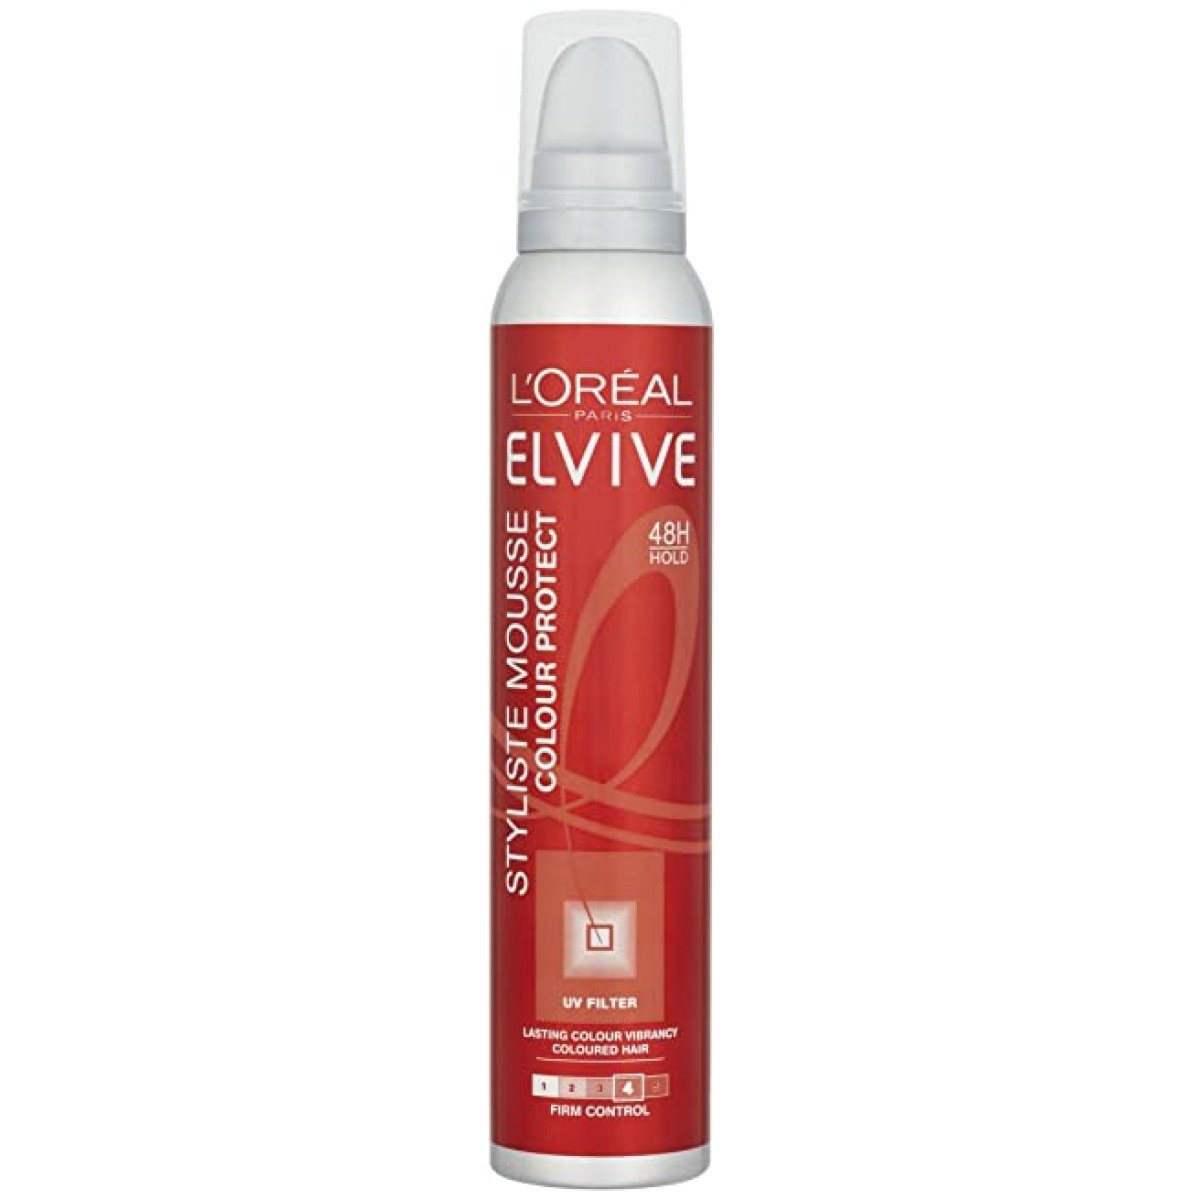 L'Oreal Elvive Styliste 48 H Hold Mousse Colour Protect (200 ml)